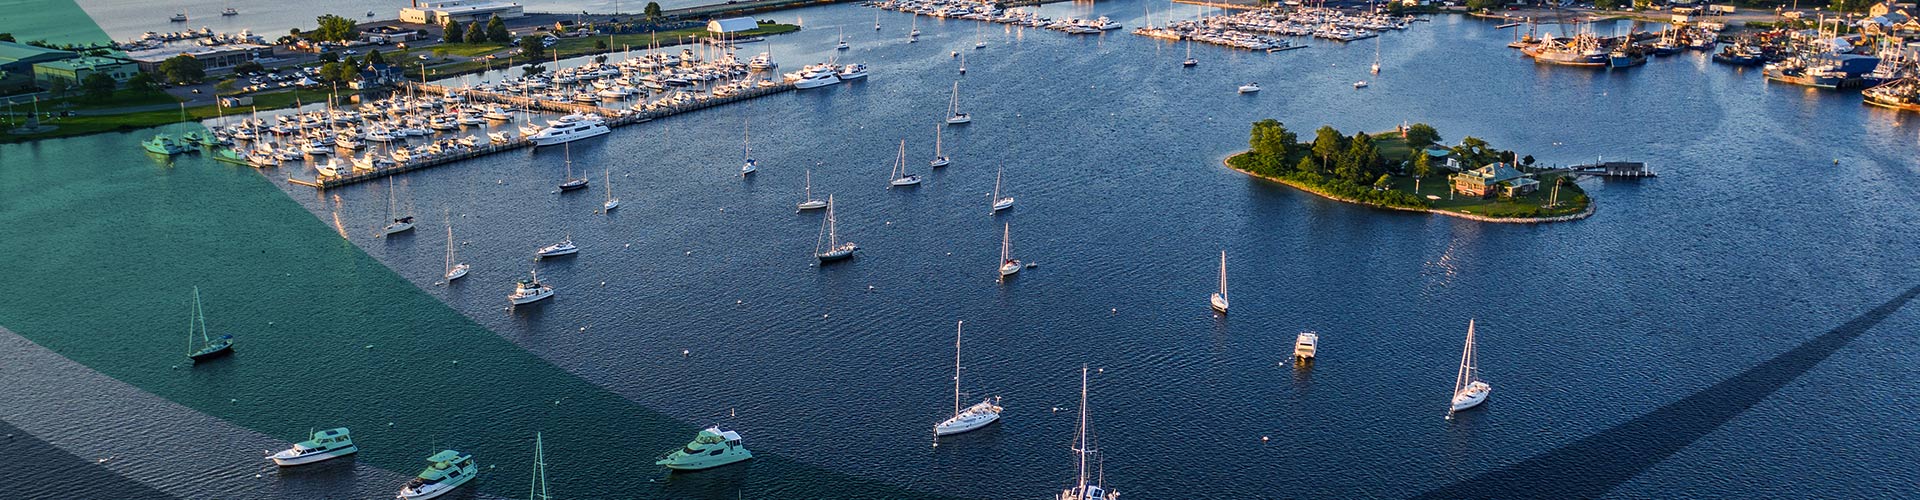 aerial picture of several boats on massachussets dartmouth ma